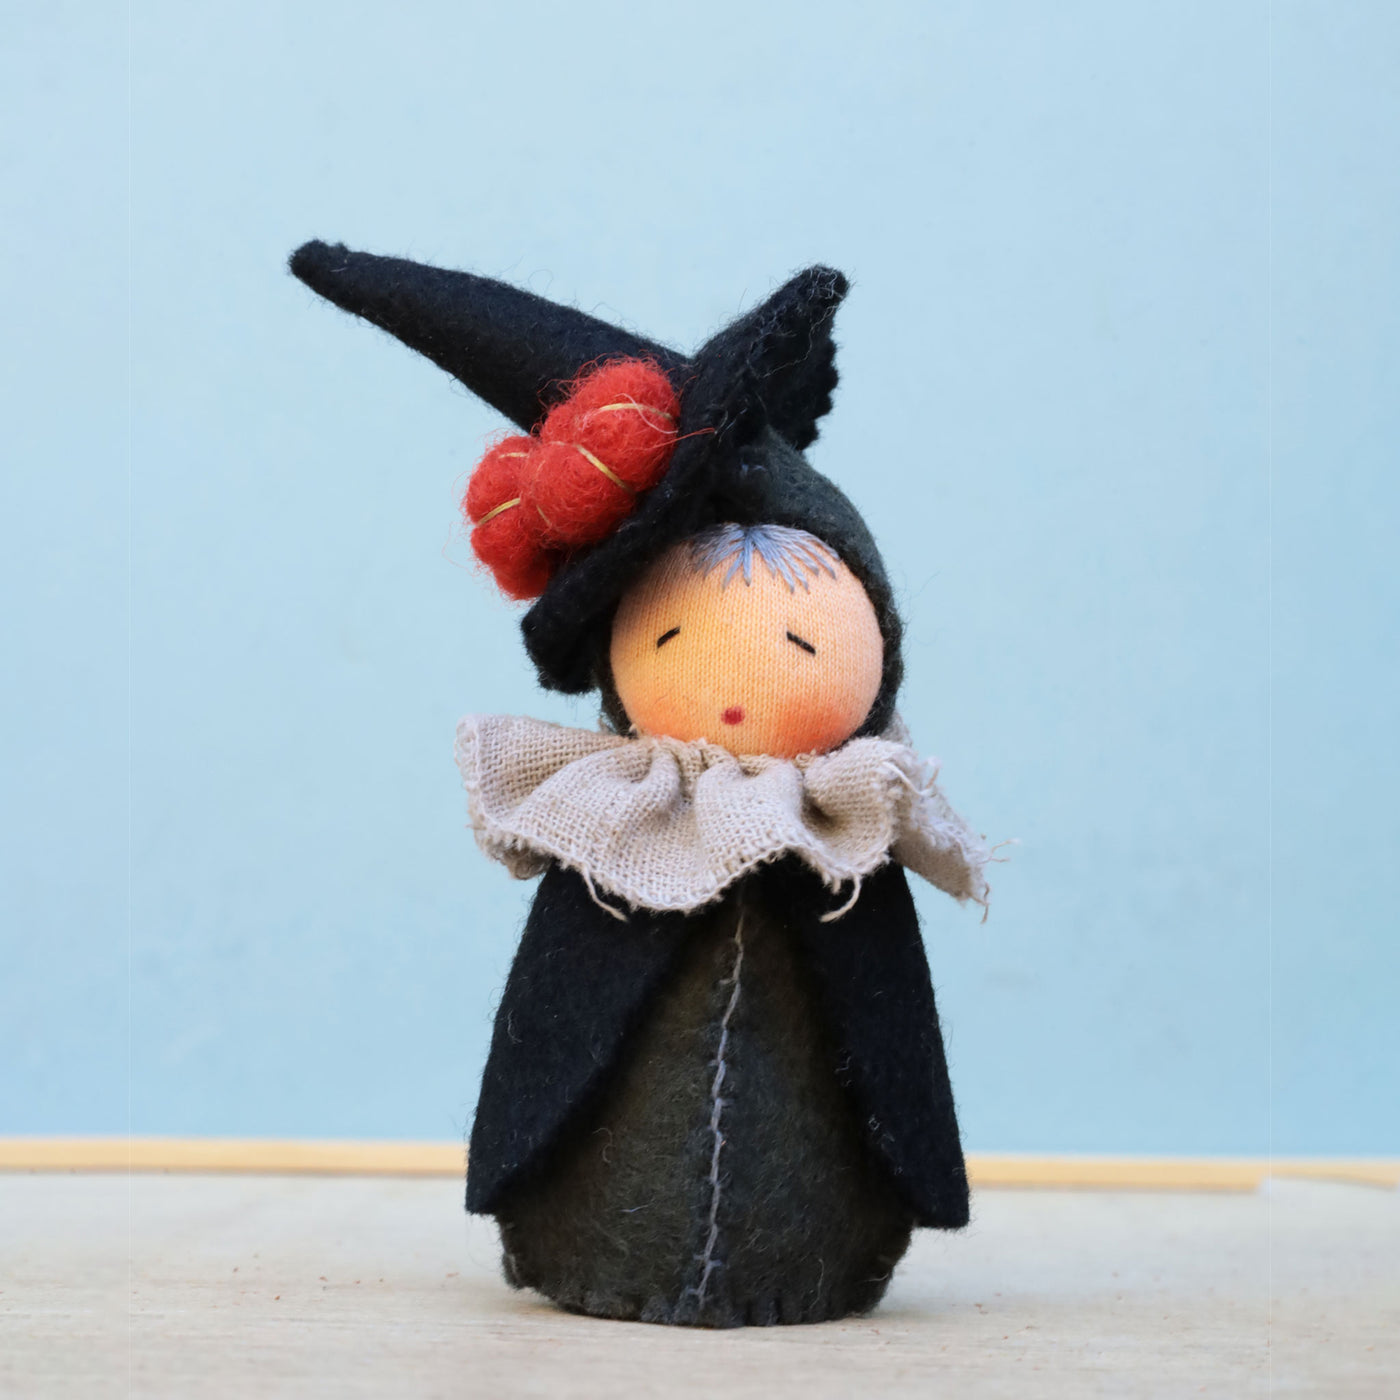 MTW Exclusive: Dollbelge Witch